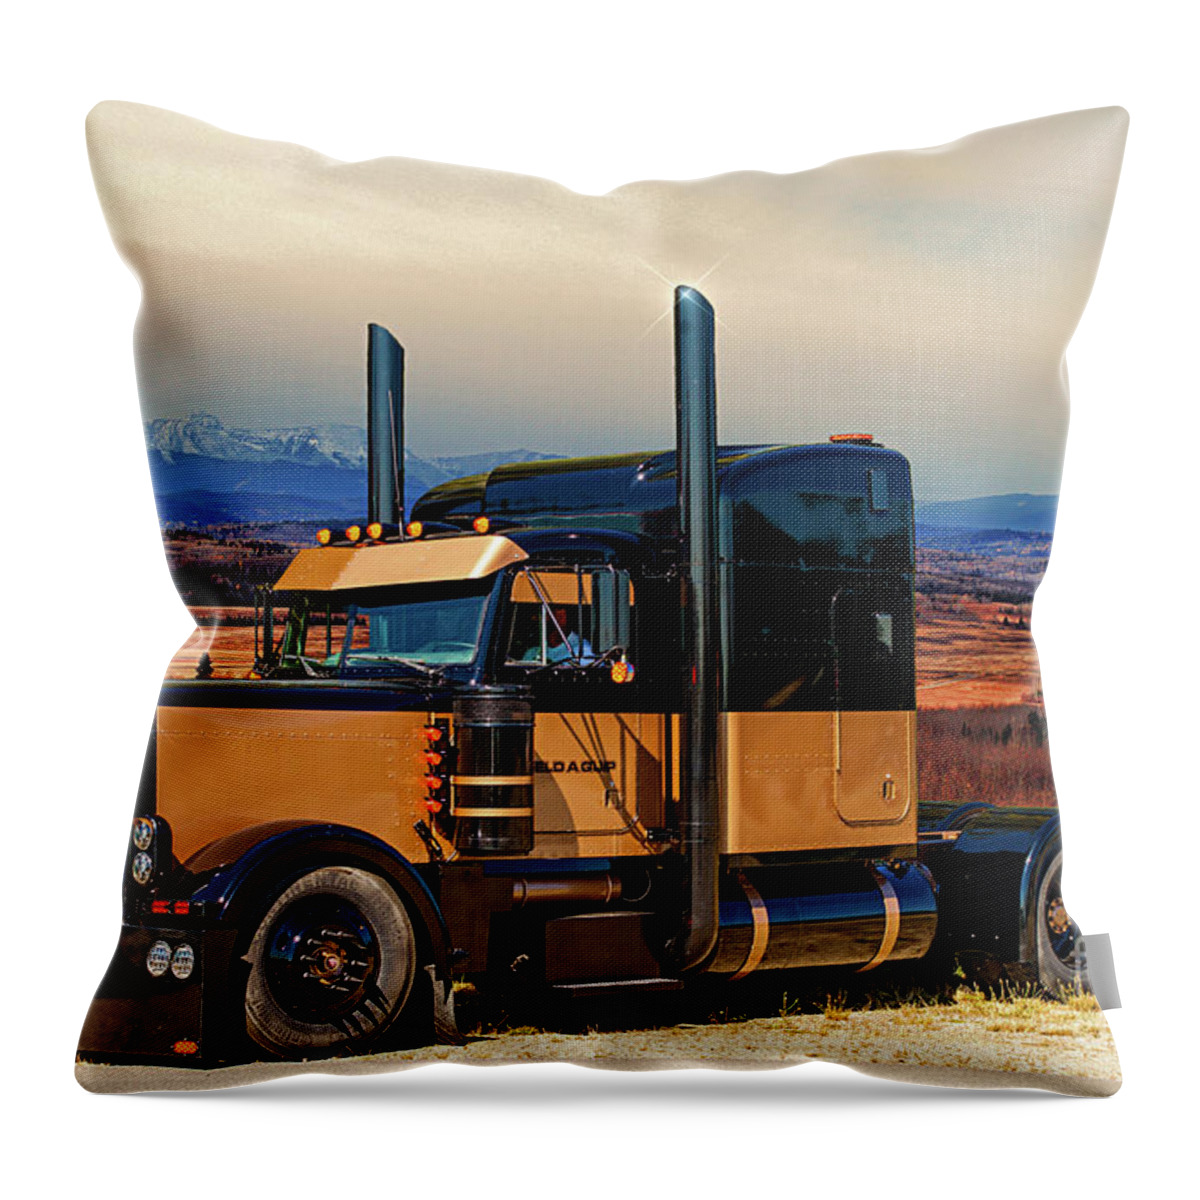 Big Rigs Throw Pillow featuring the photograph Catr0605-20 by Randy Harris